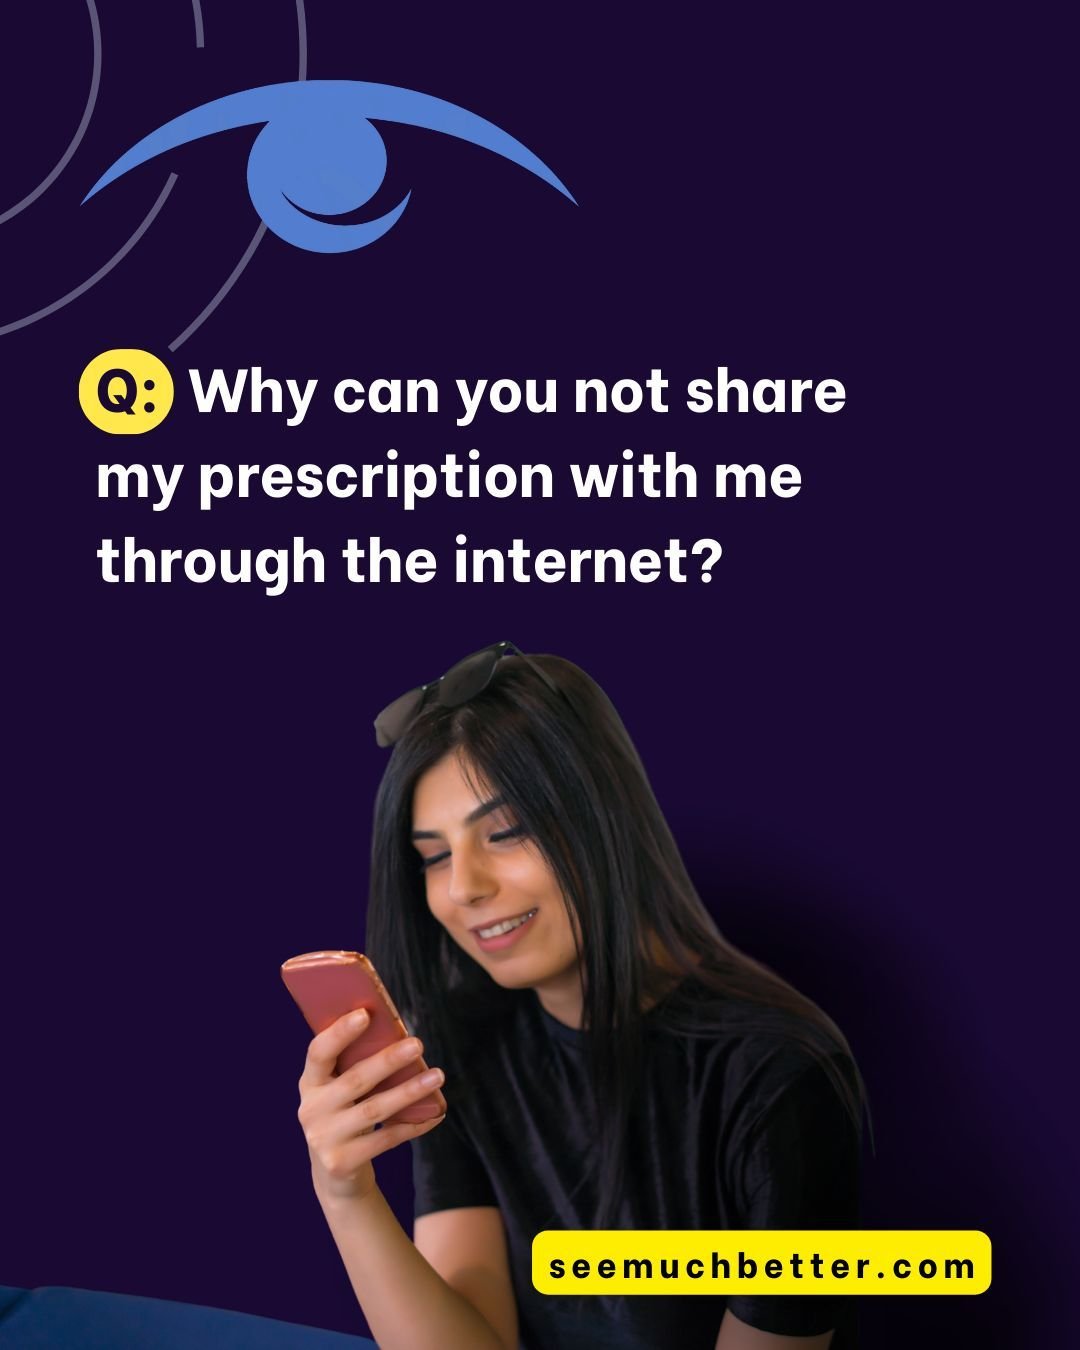 Q: Why can you not share my prescription info with me through Google, social media, or e-mail? 
A: Protected health information (PHI) cannot be shared under HIPAA. So what exactly is considered PHI according to HIPAA? It's information that can identi